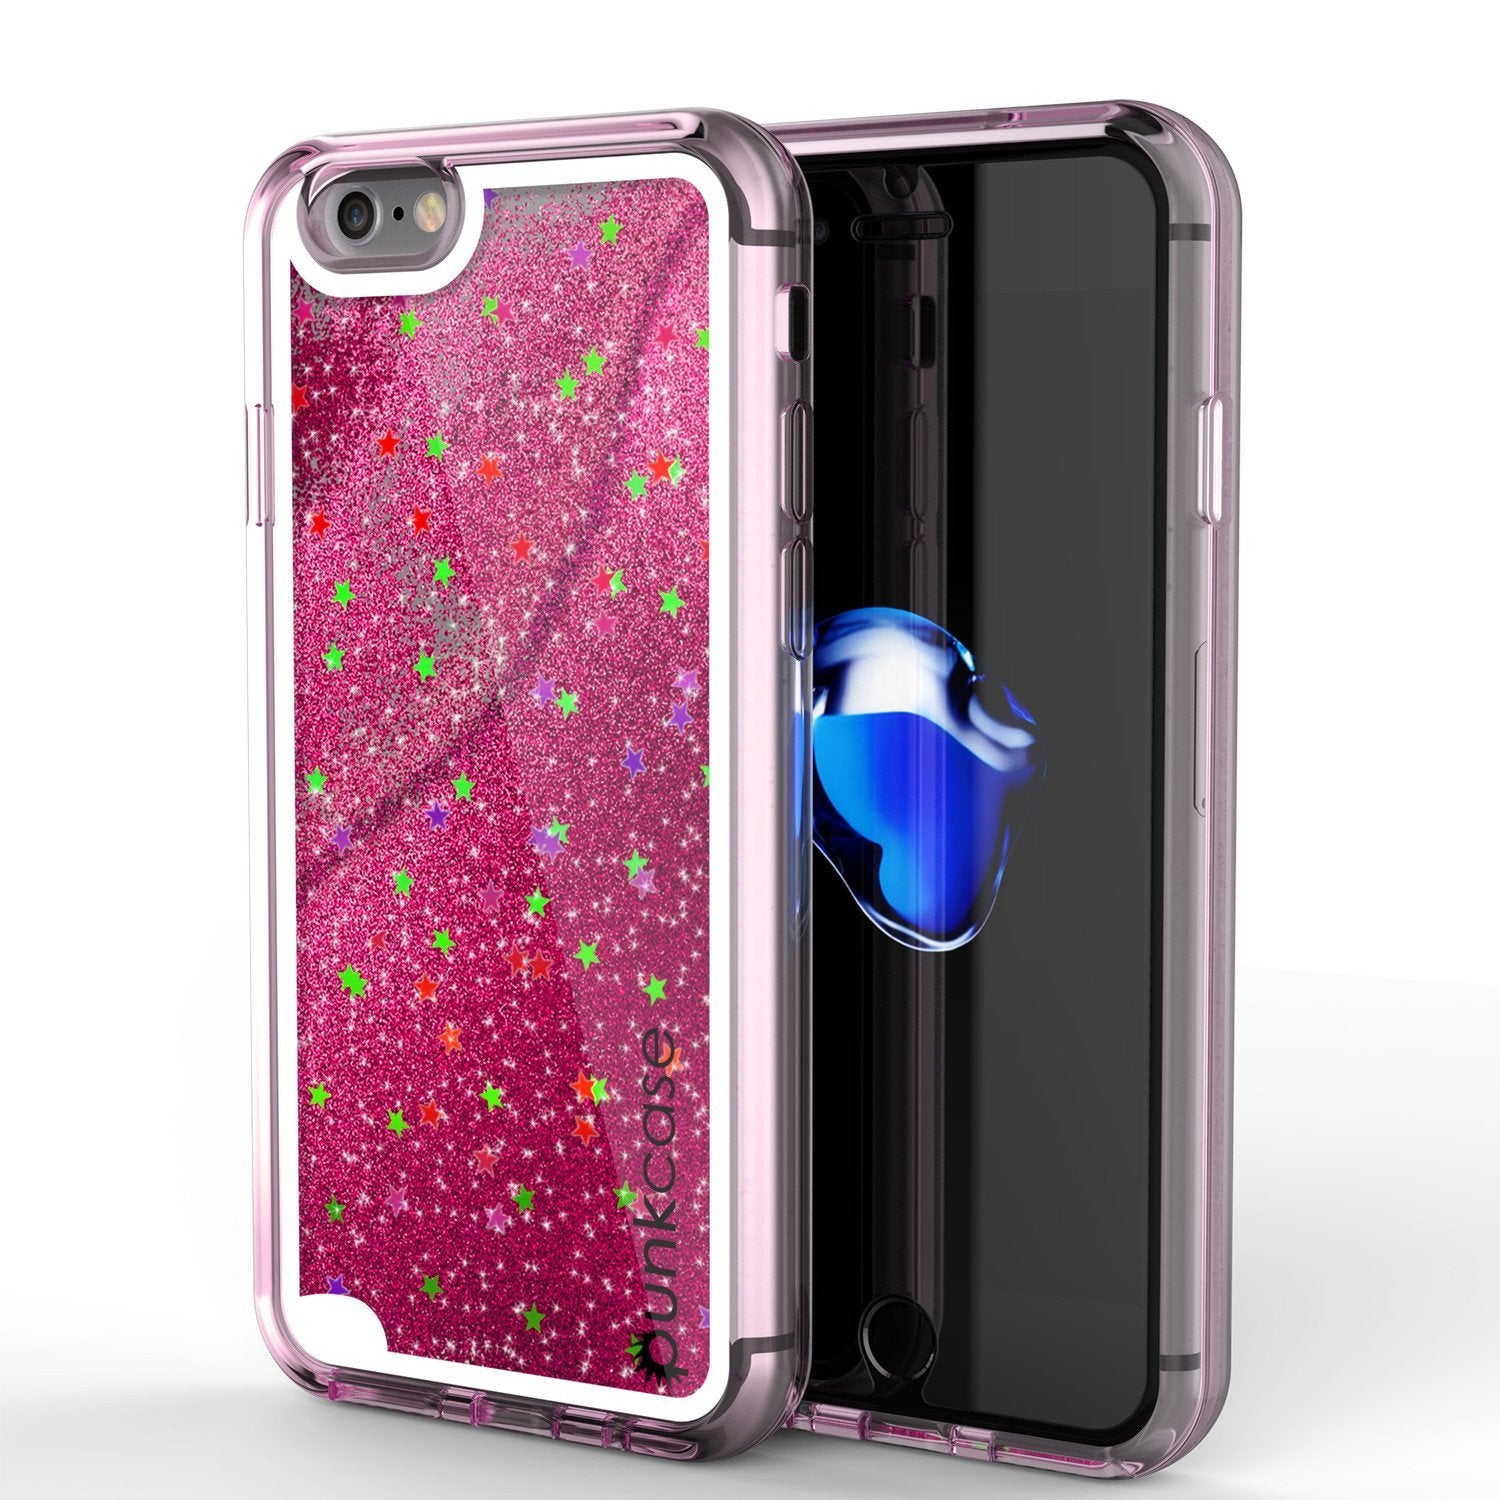 iPhone 8 Case, PunkCase LIQUID Pink Series, Protective Dual Layer Floating Glitter Cover (Color in image: pink)